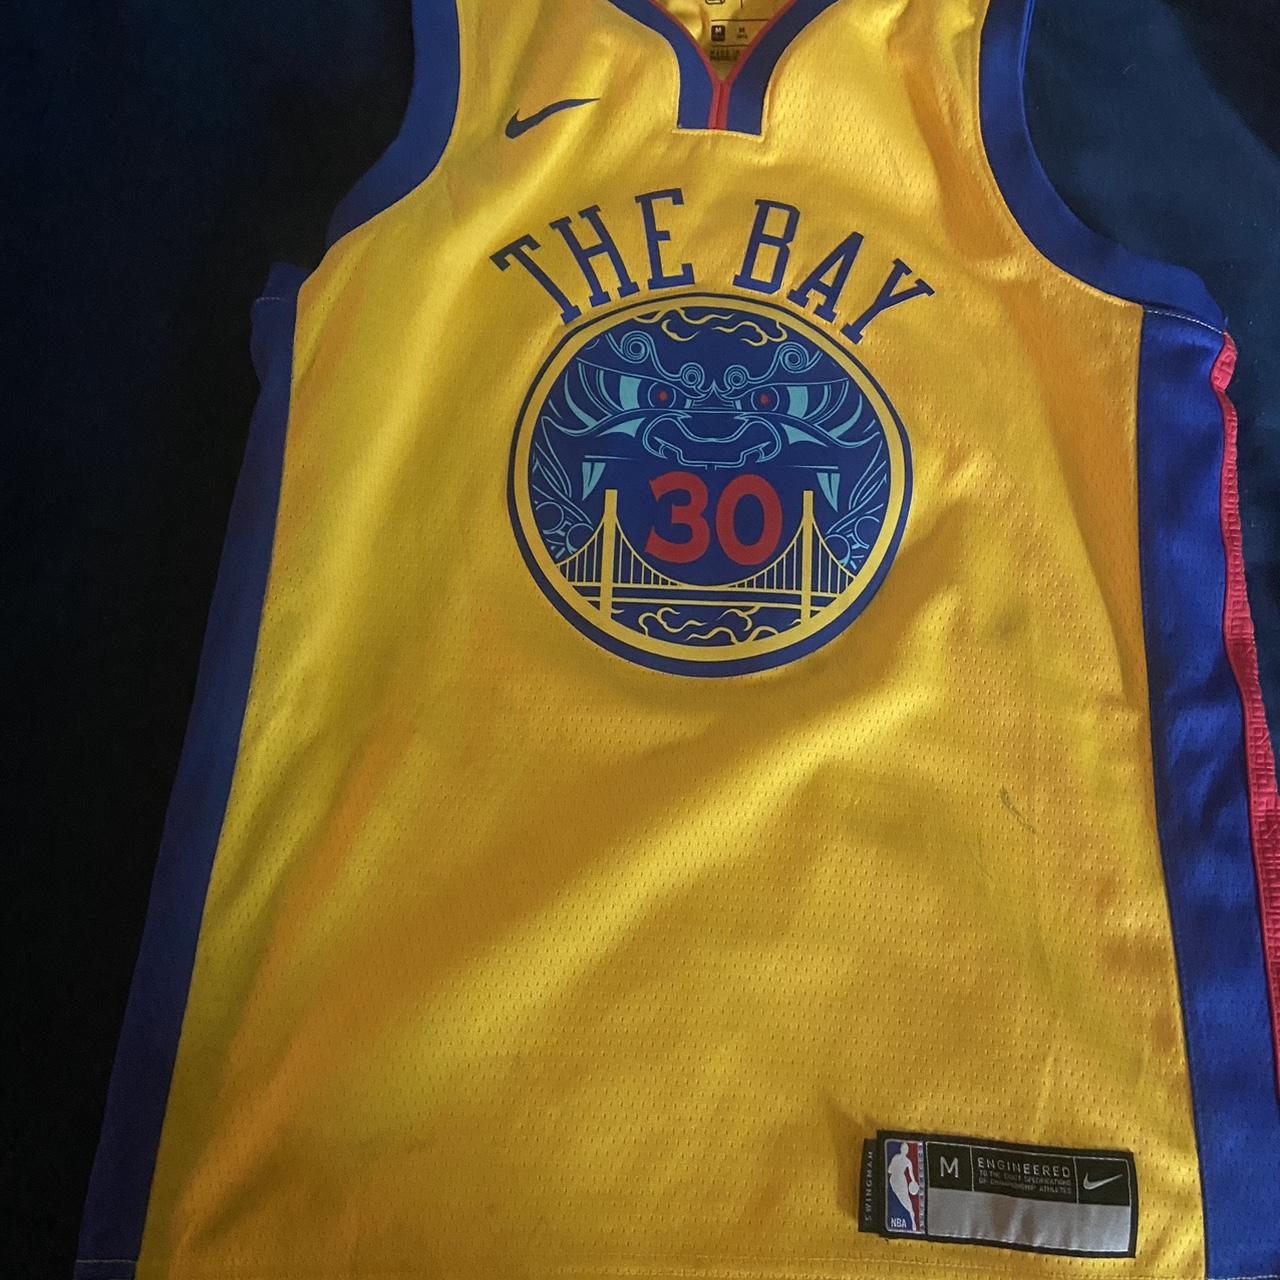 Steph curry city jersey only worn 1 - Depop